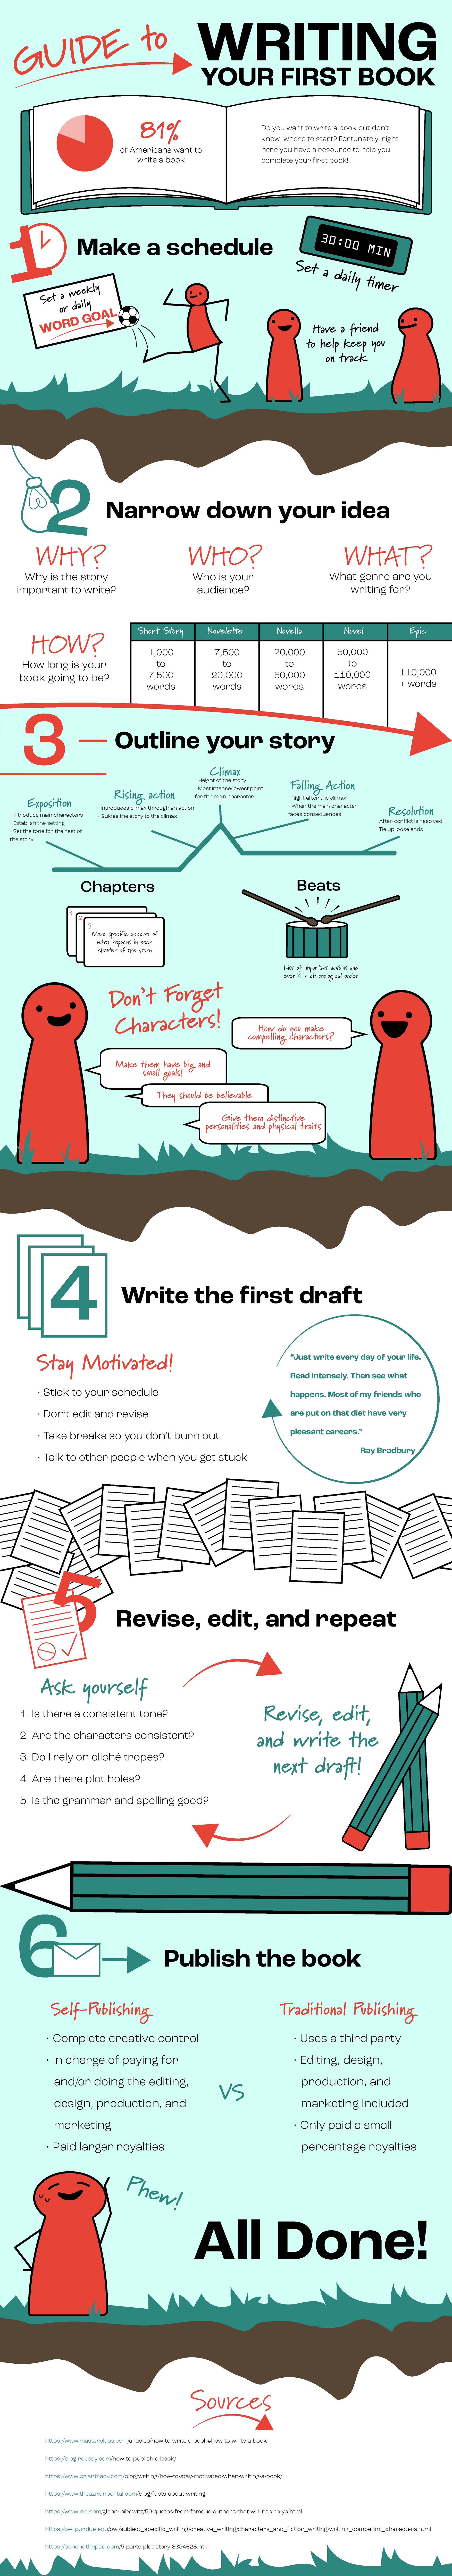 Third infographic version complete with steps 1 through 6 and sources